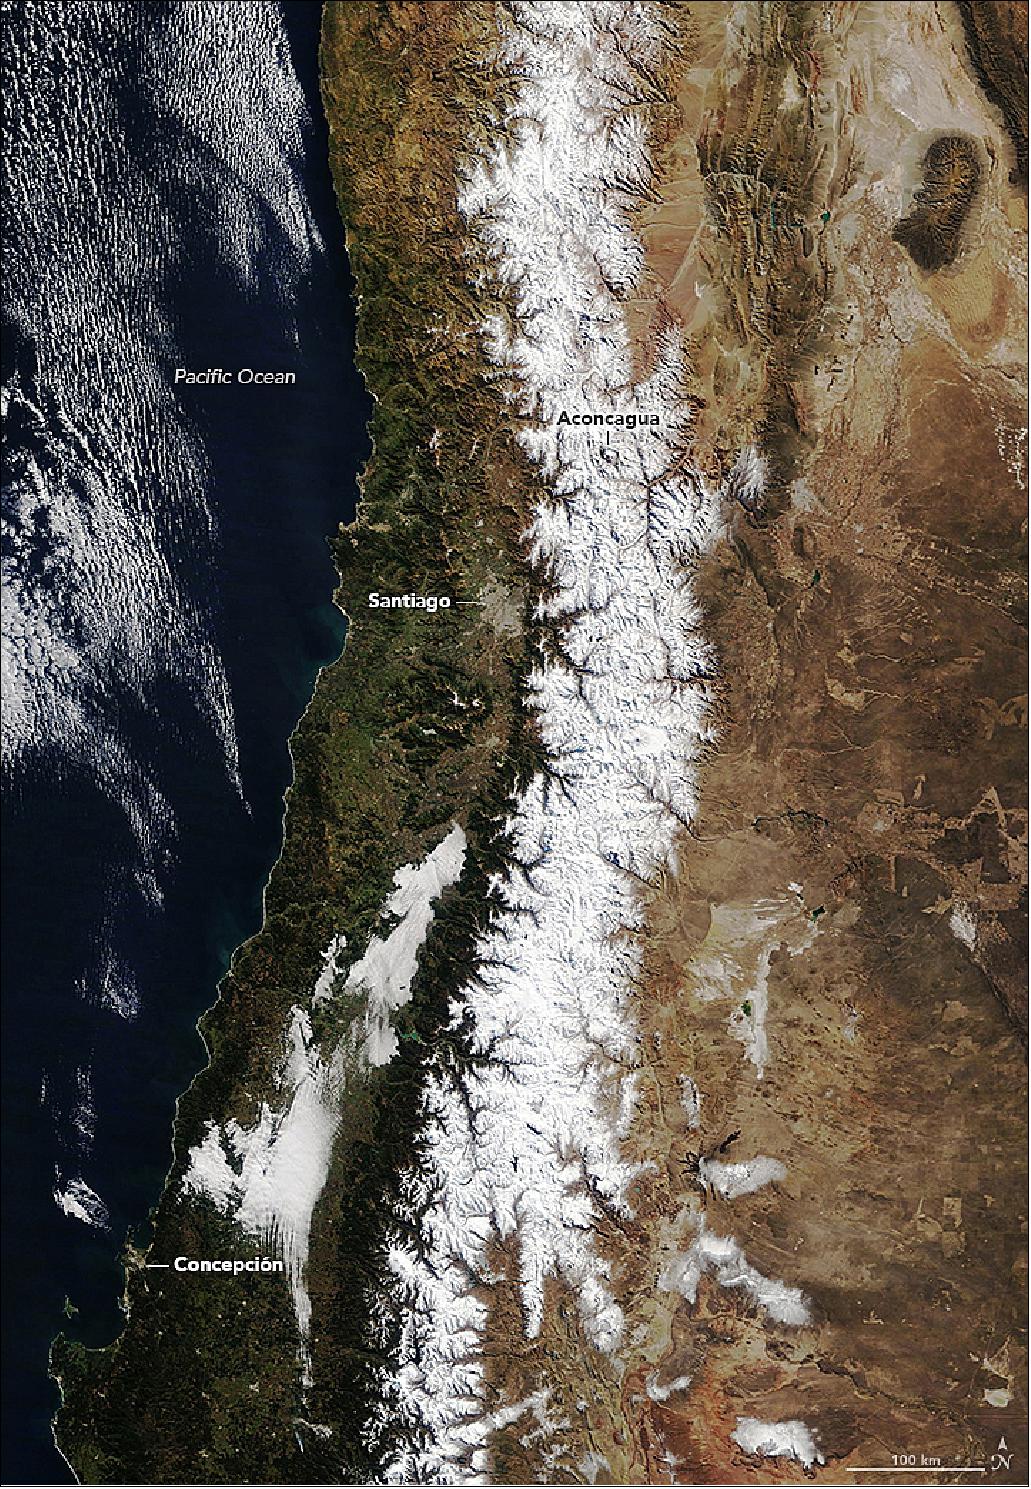 Figure 14: MODIS image acquired on 30July 2018 showing the snow coverage in the Andes region (image credit: NASA Earth Observatory, image by Lauren Dauphin, using MODIS data from LANCE/EOSDIS Rapid Response, story by Kathryn Hansen)